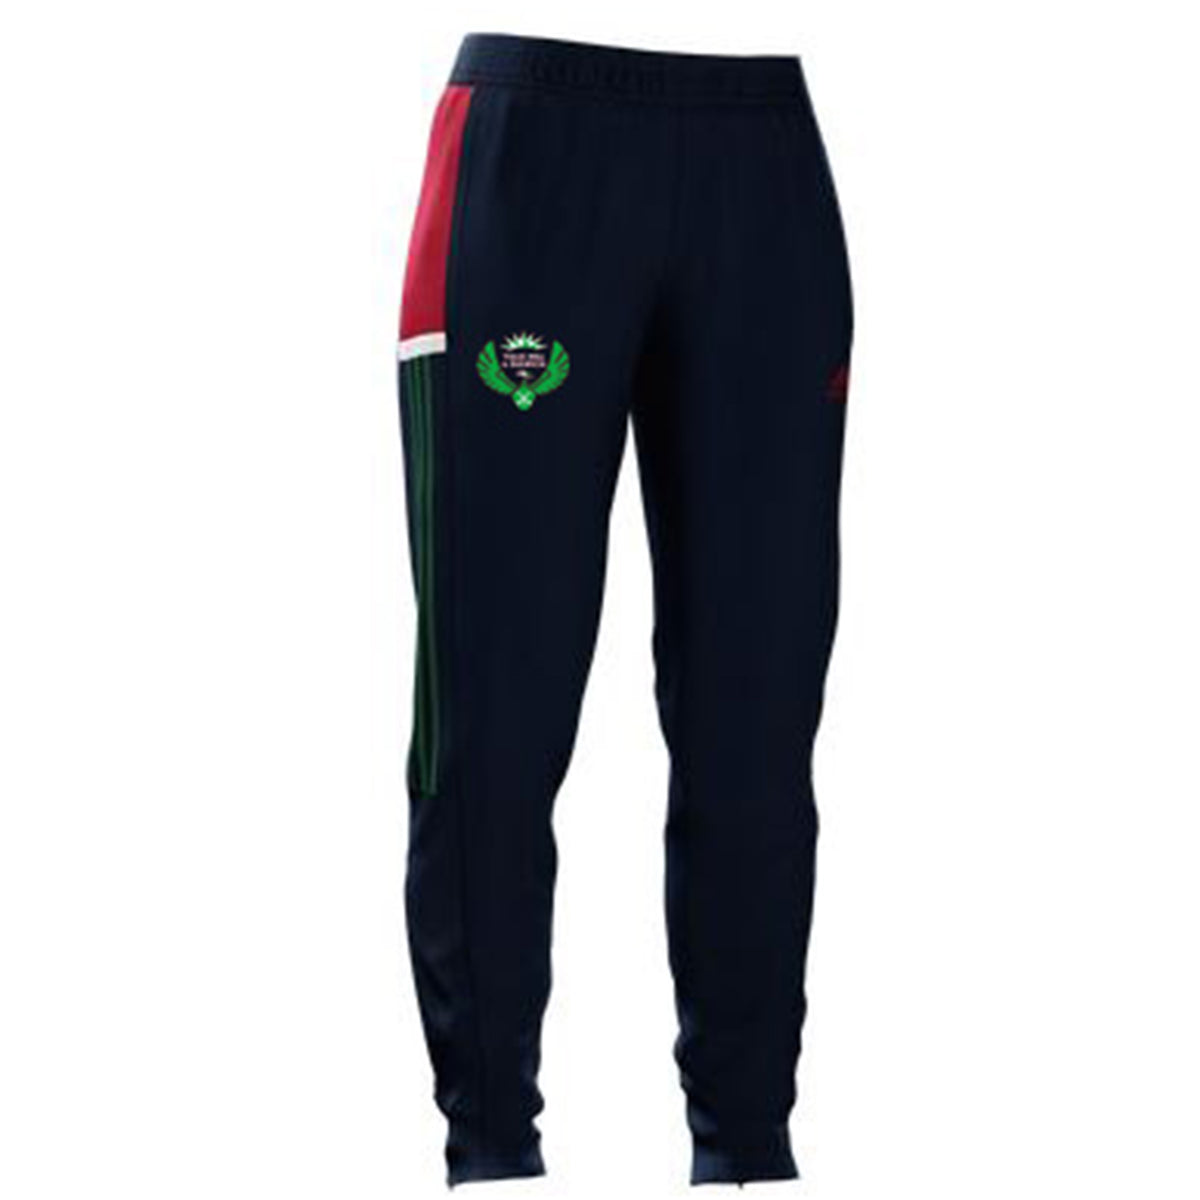 Tulse Hill and Dulwich HC 2022 Ladies Track Pant